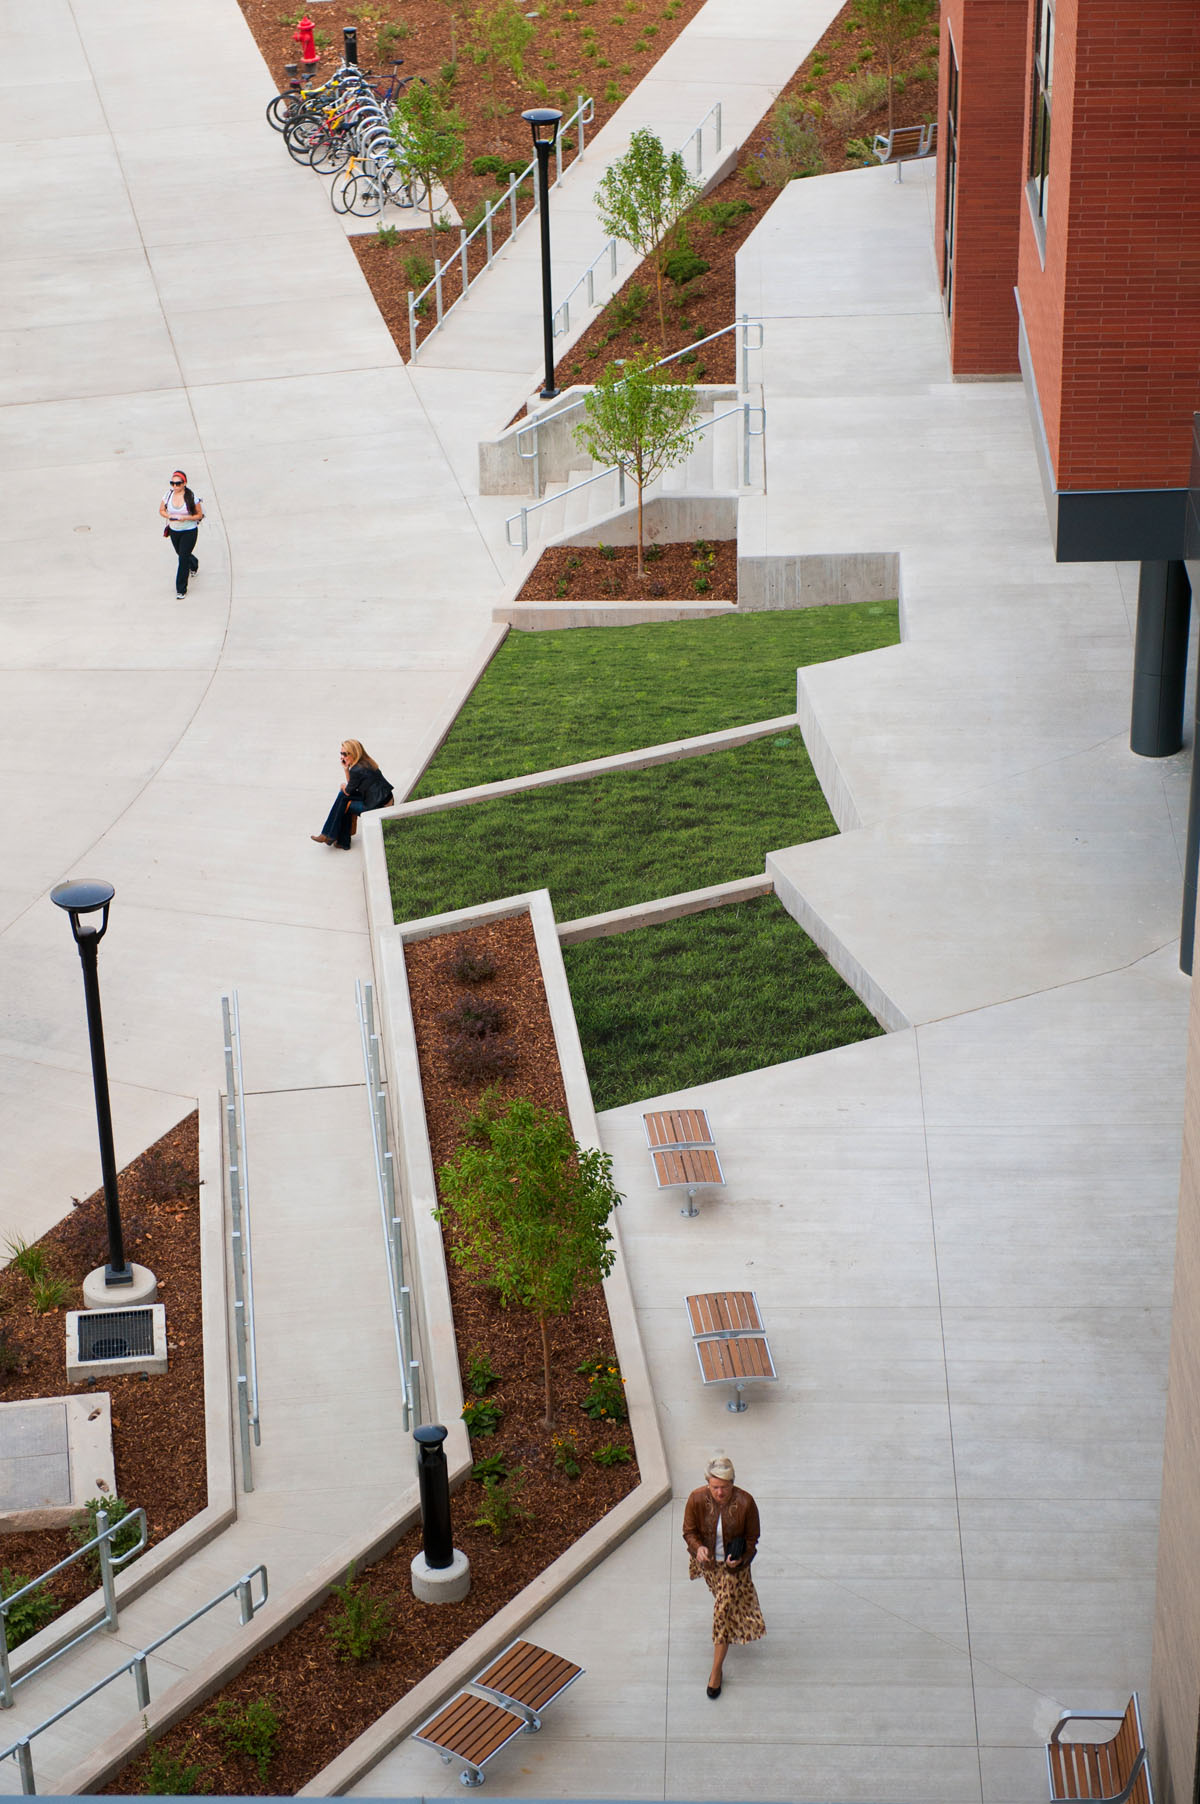 A woman walks next to the landscaping of the honors student housing building as another woman sits next to the grass and a student walks towards the building.